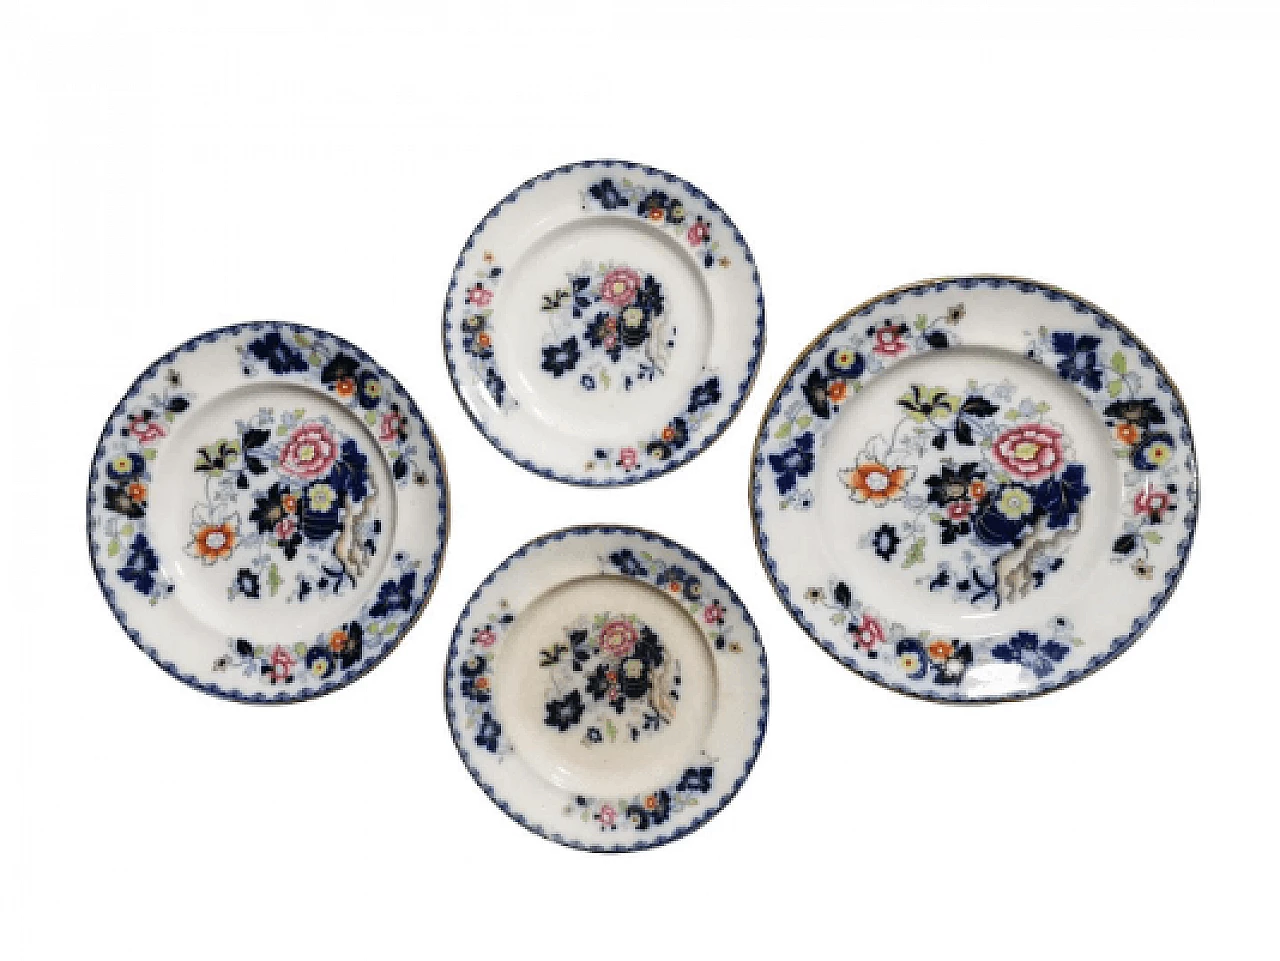 4 Victorian ceramic plates with Royal Arms mark, mid-19th century 1